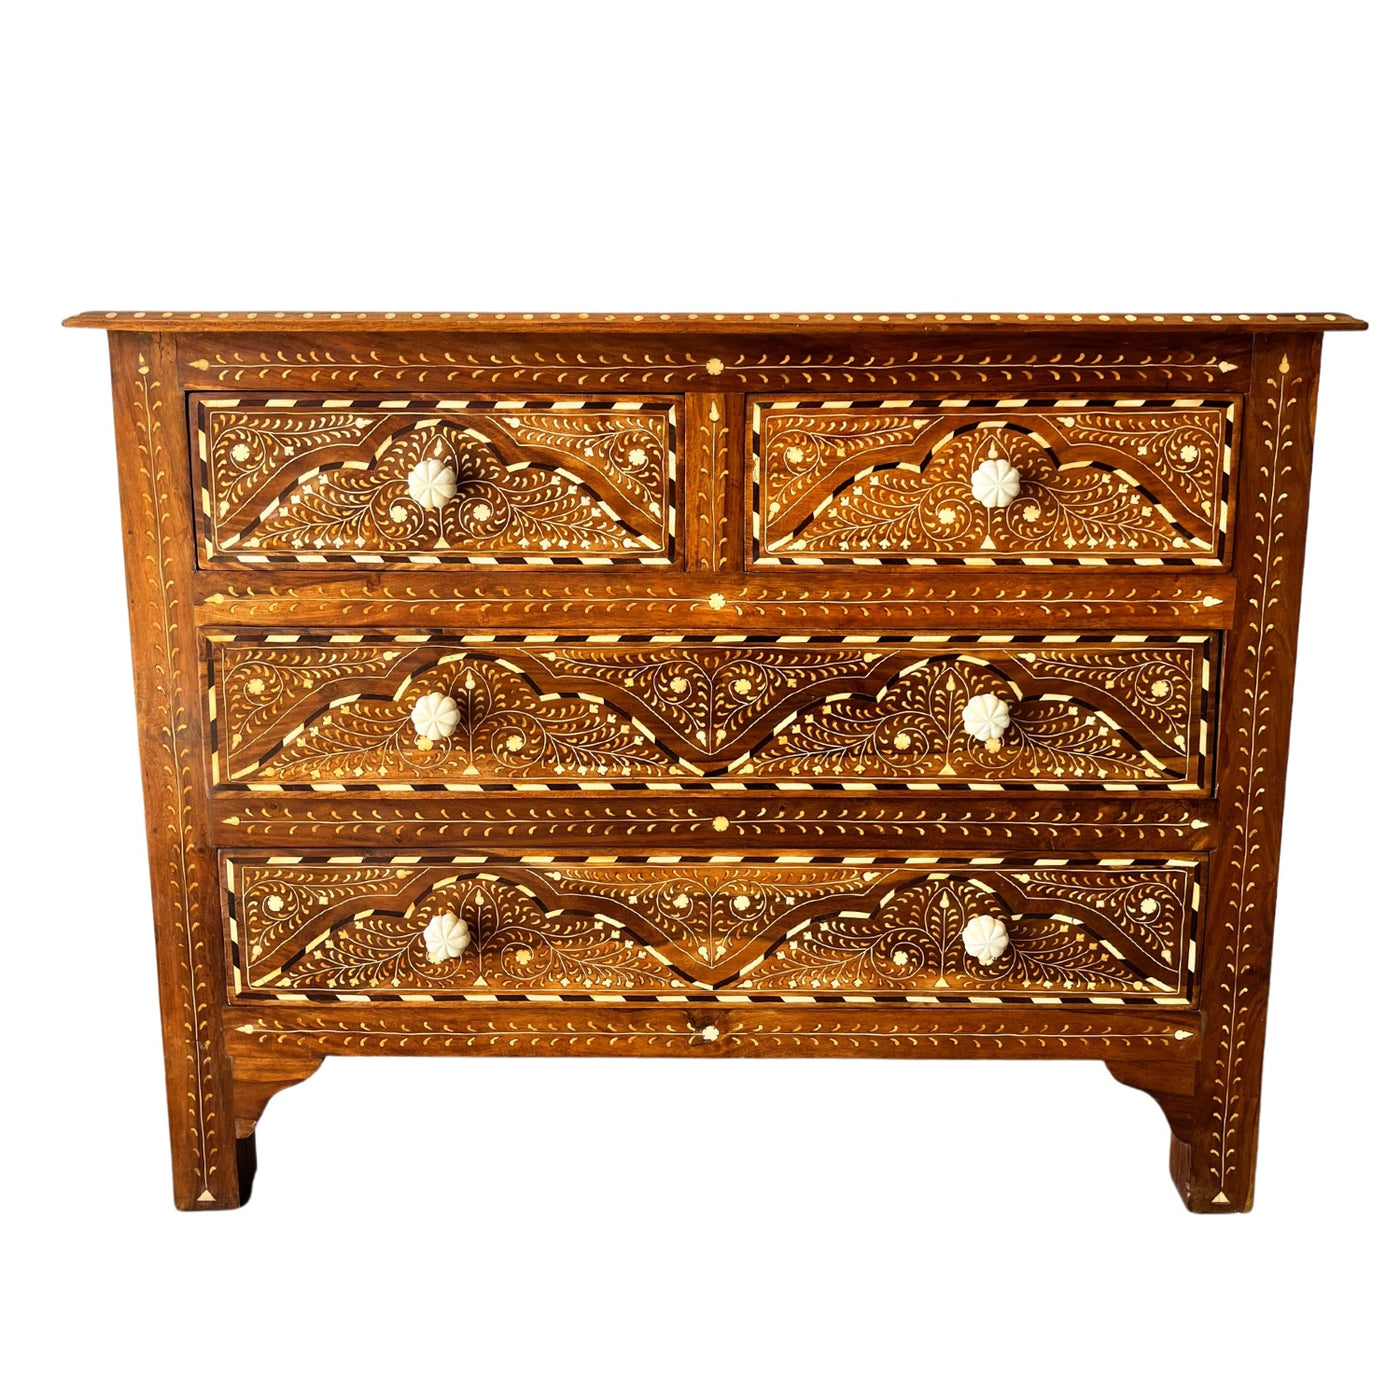 Front image of 4 drawer teak chest with bone inlay detailing and scalloped bone knobs